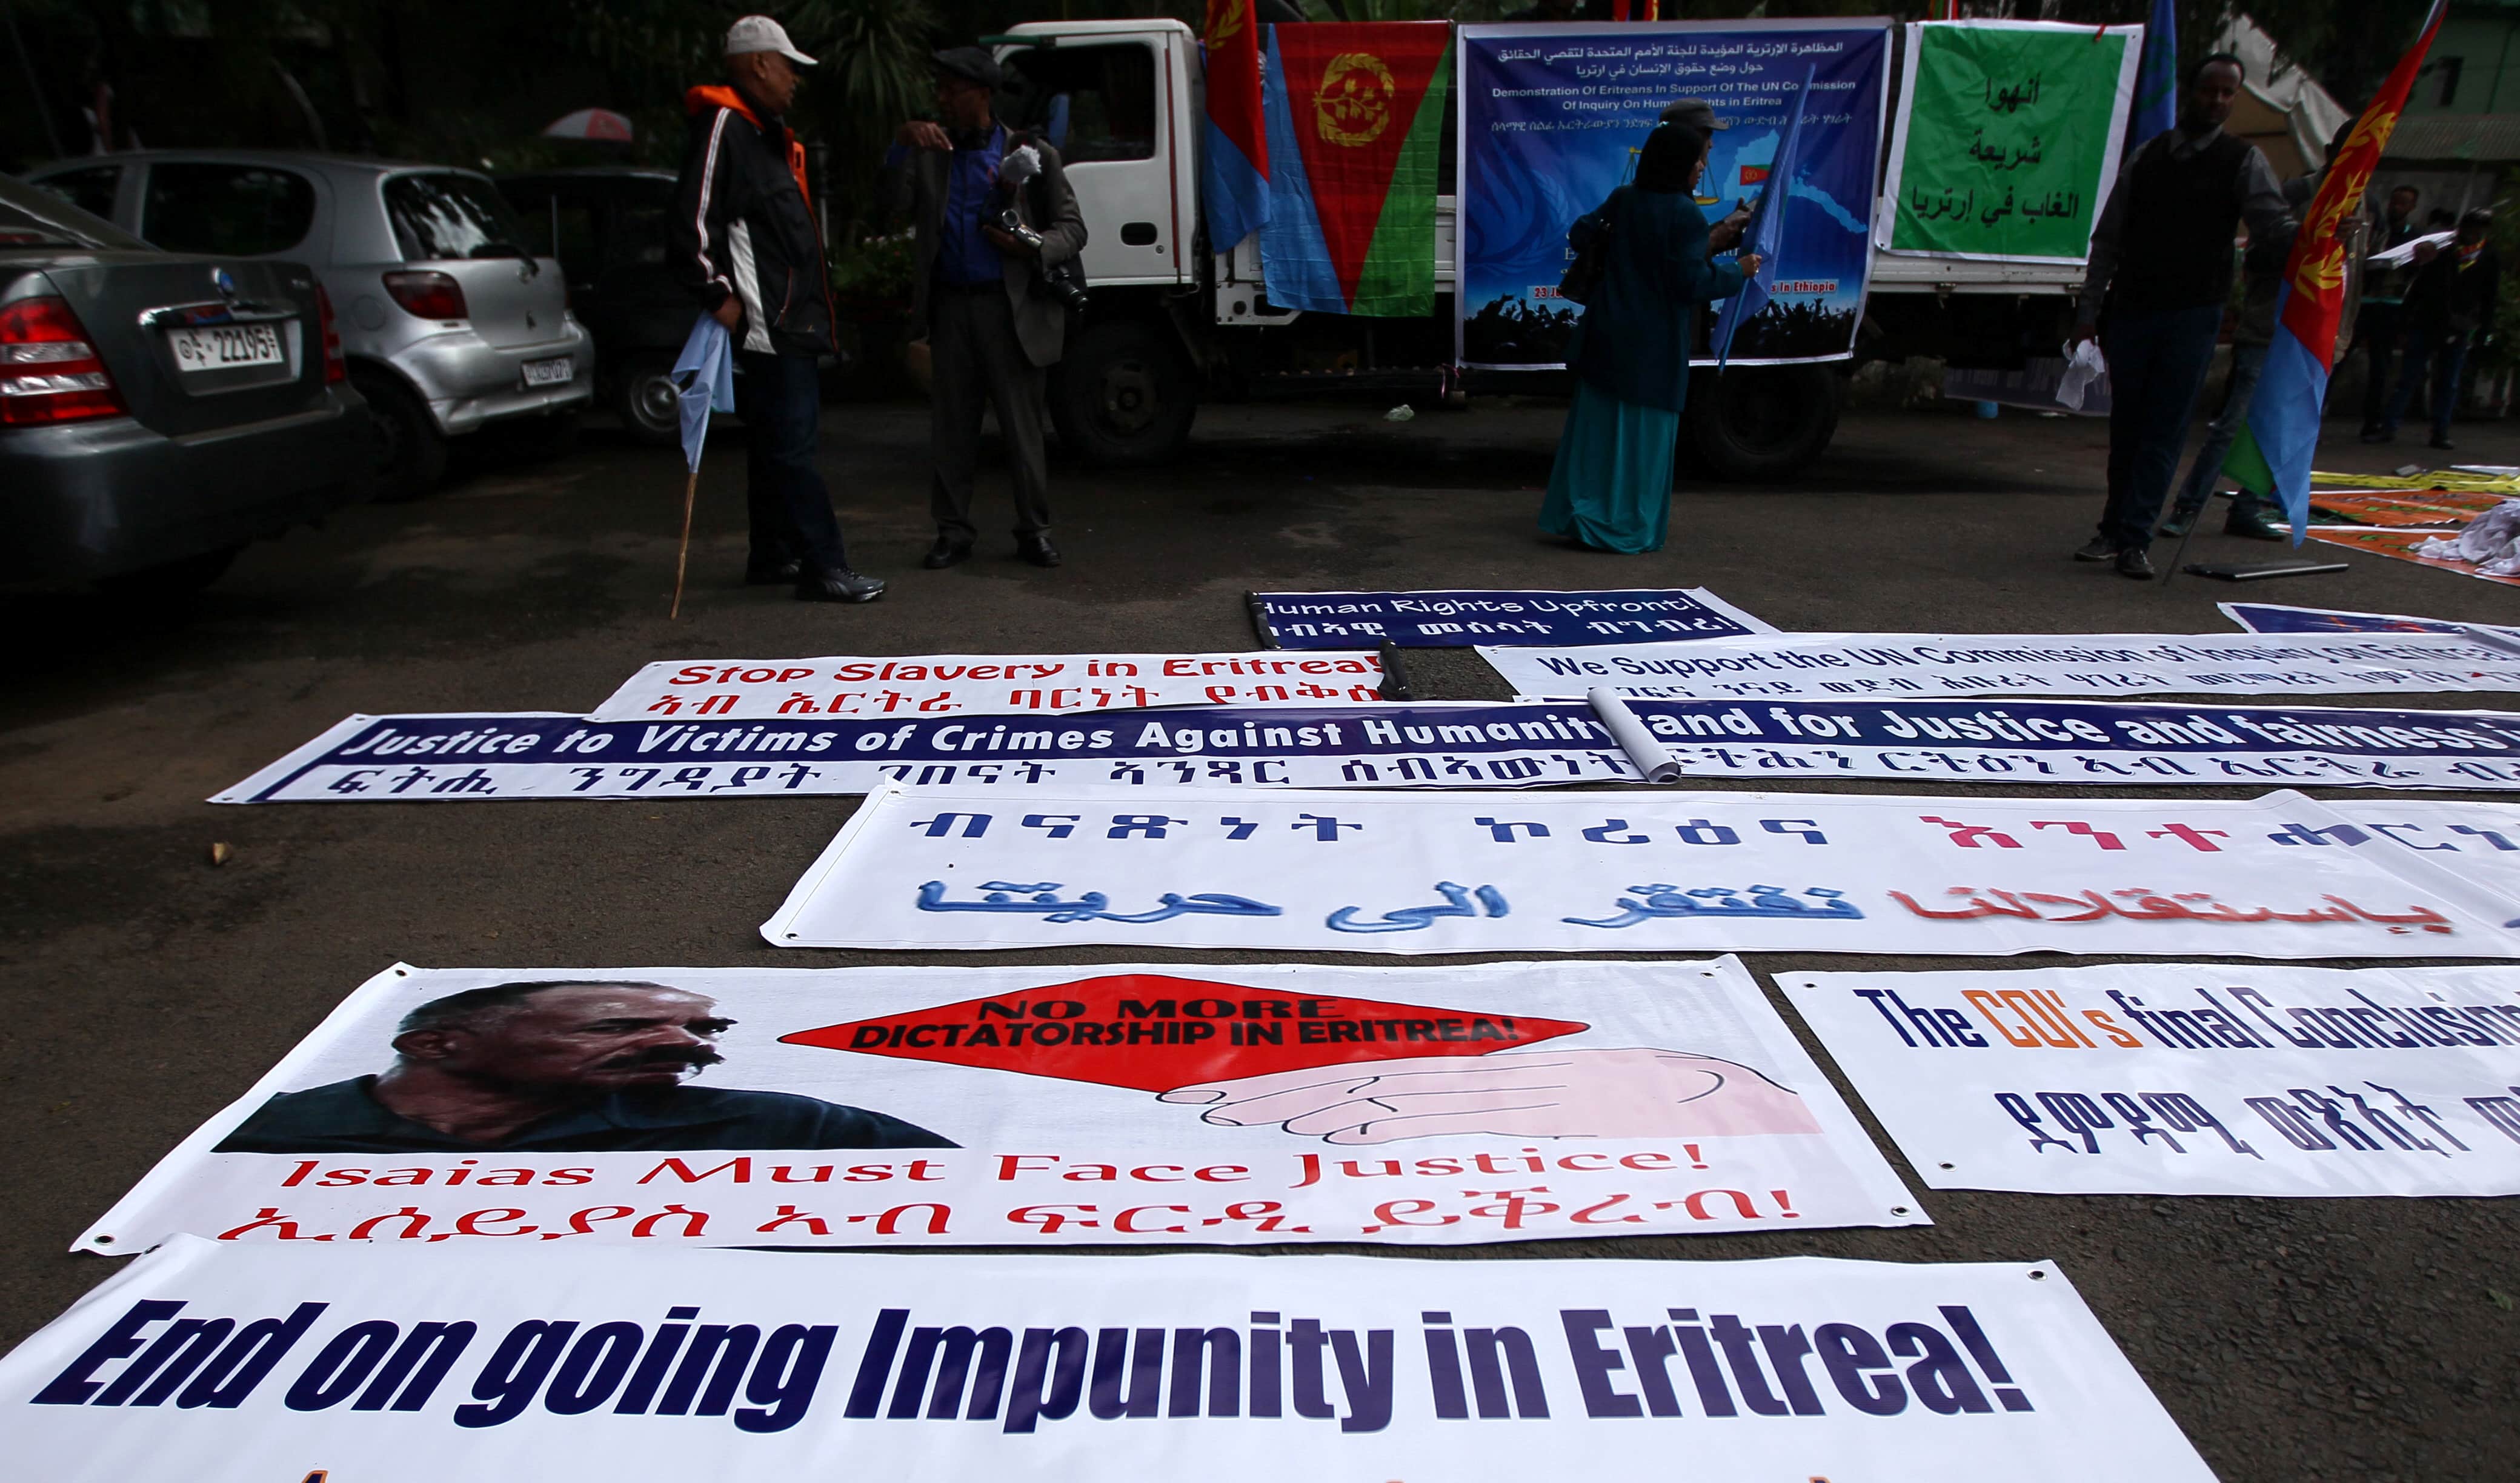 Eritrean refugees display banners and placards with pictures of Eritrean President Isaias Afwerki during a demonstration in support of a U.N. human rights report accusing Eritrean leaders of crimes against humanity in front of the Africa Union headquarters in Addis Ababa, Ethiopia, 23 June 2016, REUTERS/Tiksa Negeri